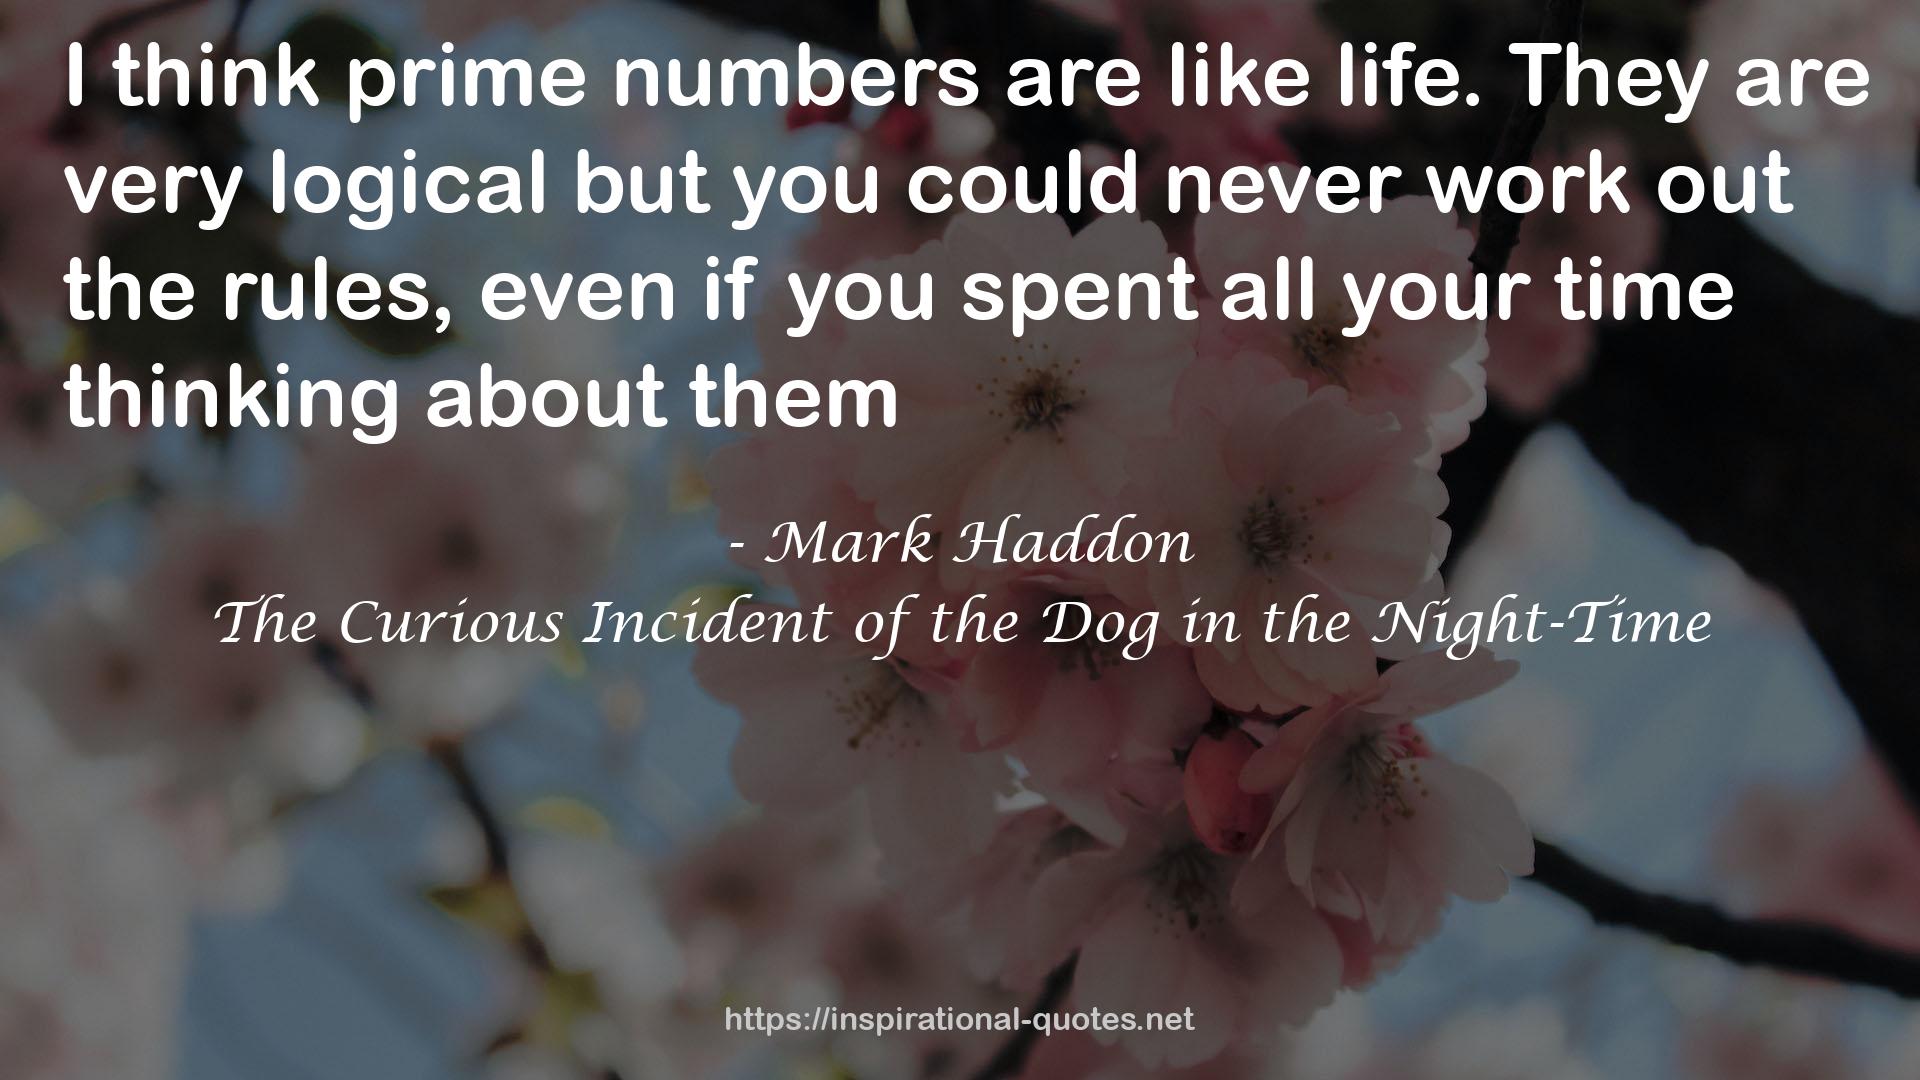 The Curious Incident of the Dog in the Night-Time QUOTES